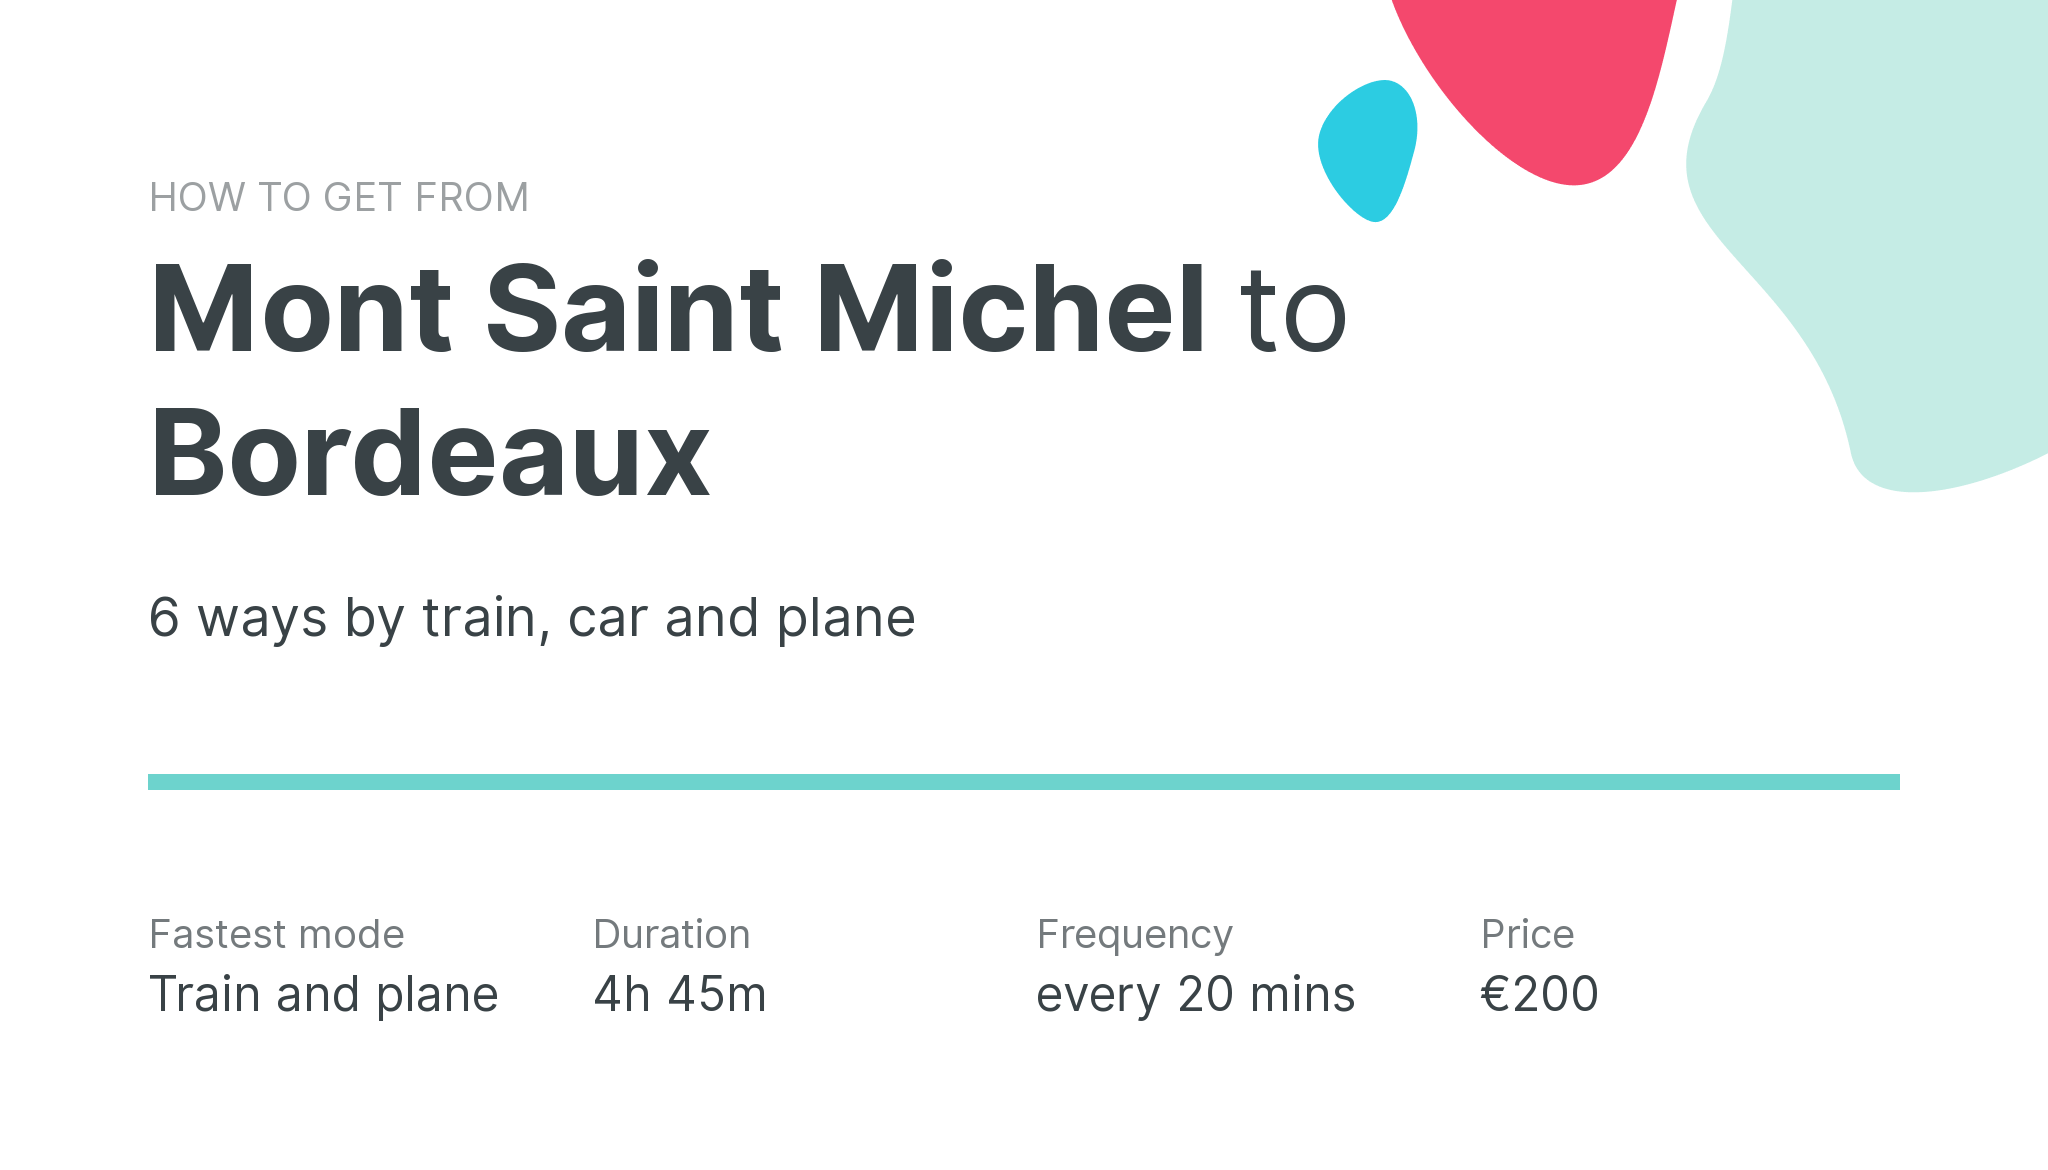 How do I get from Mont Saint Michel to Bordeaux